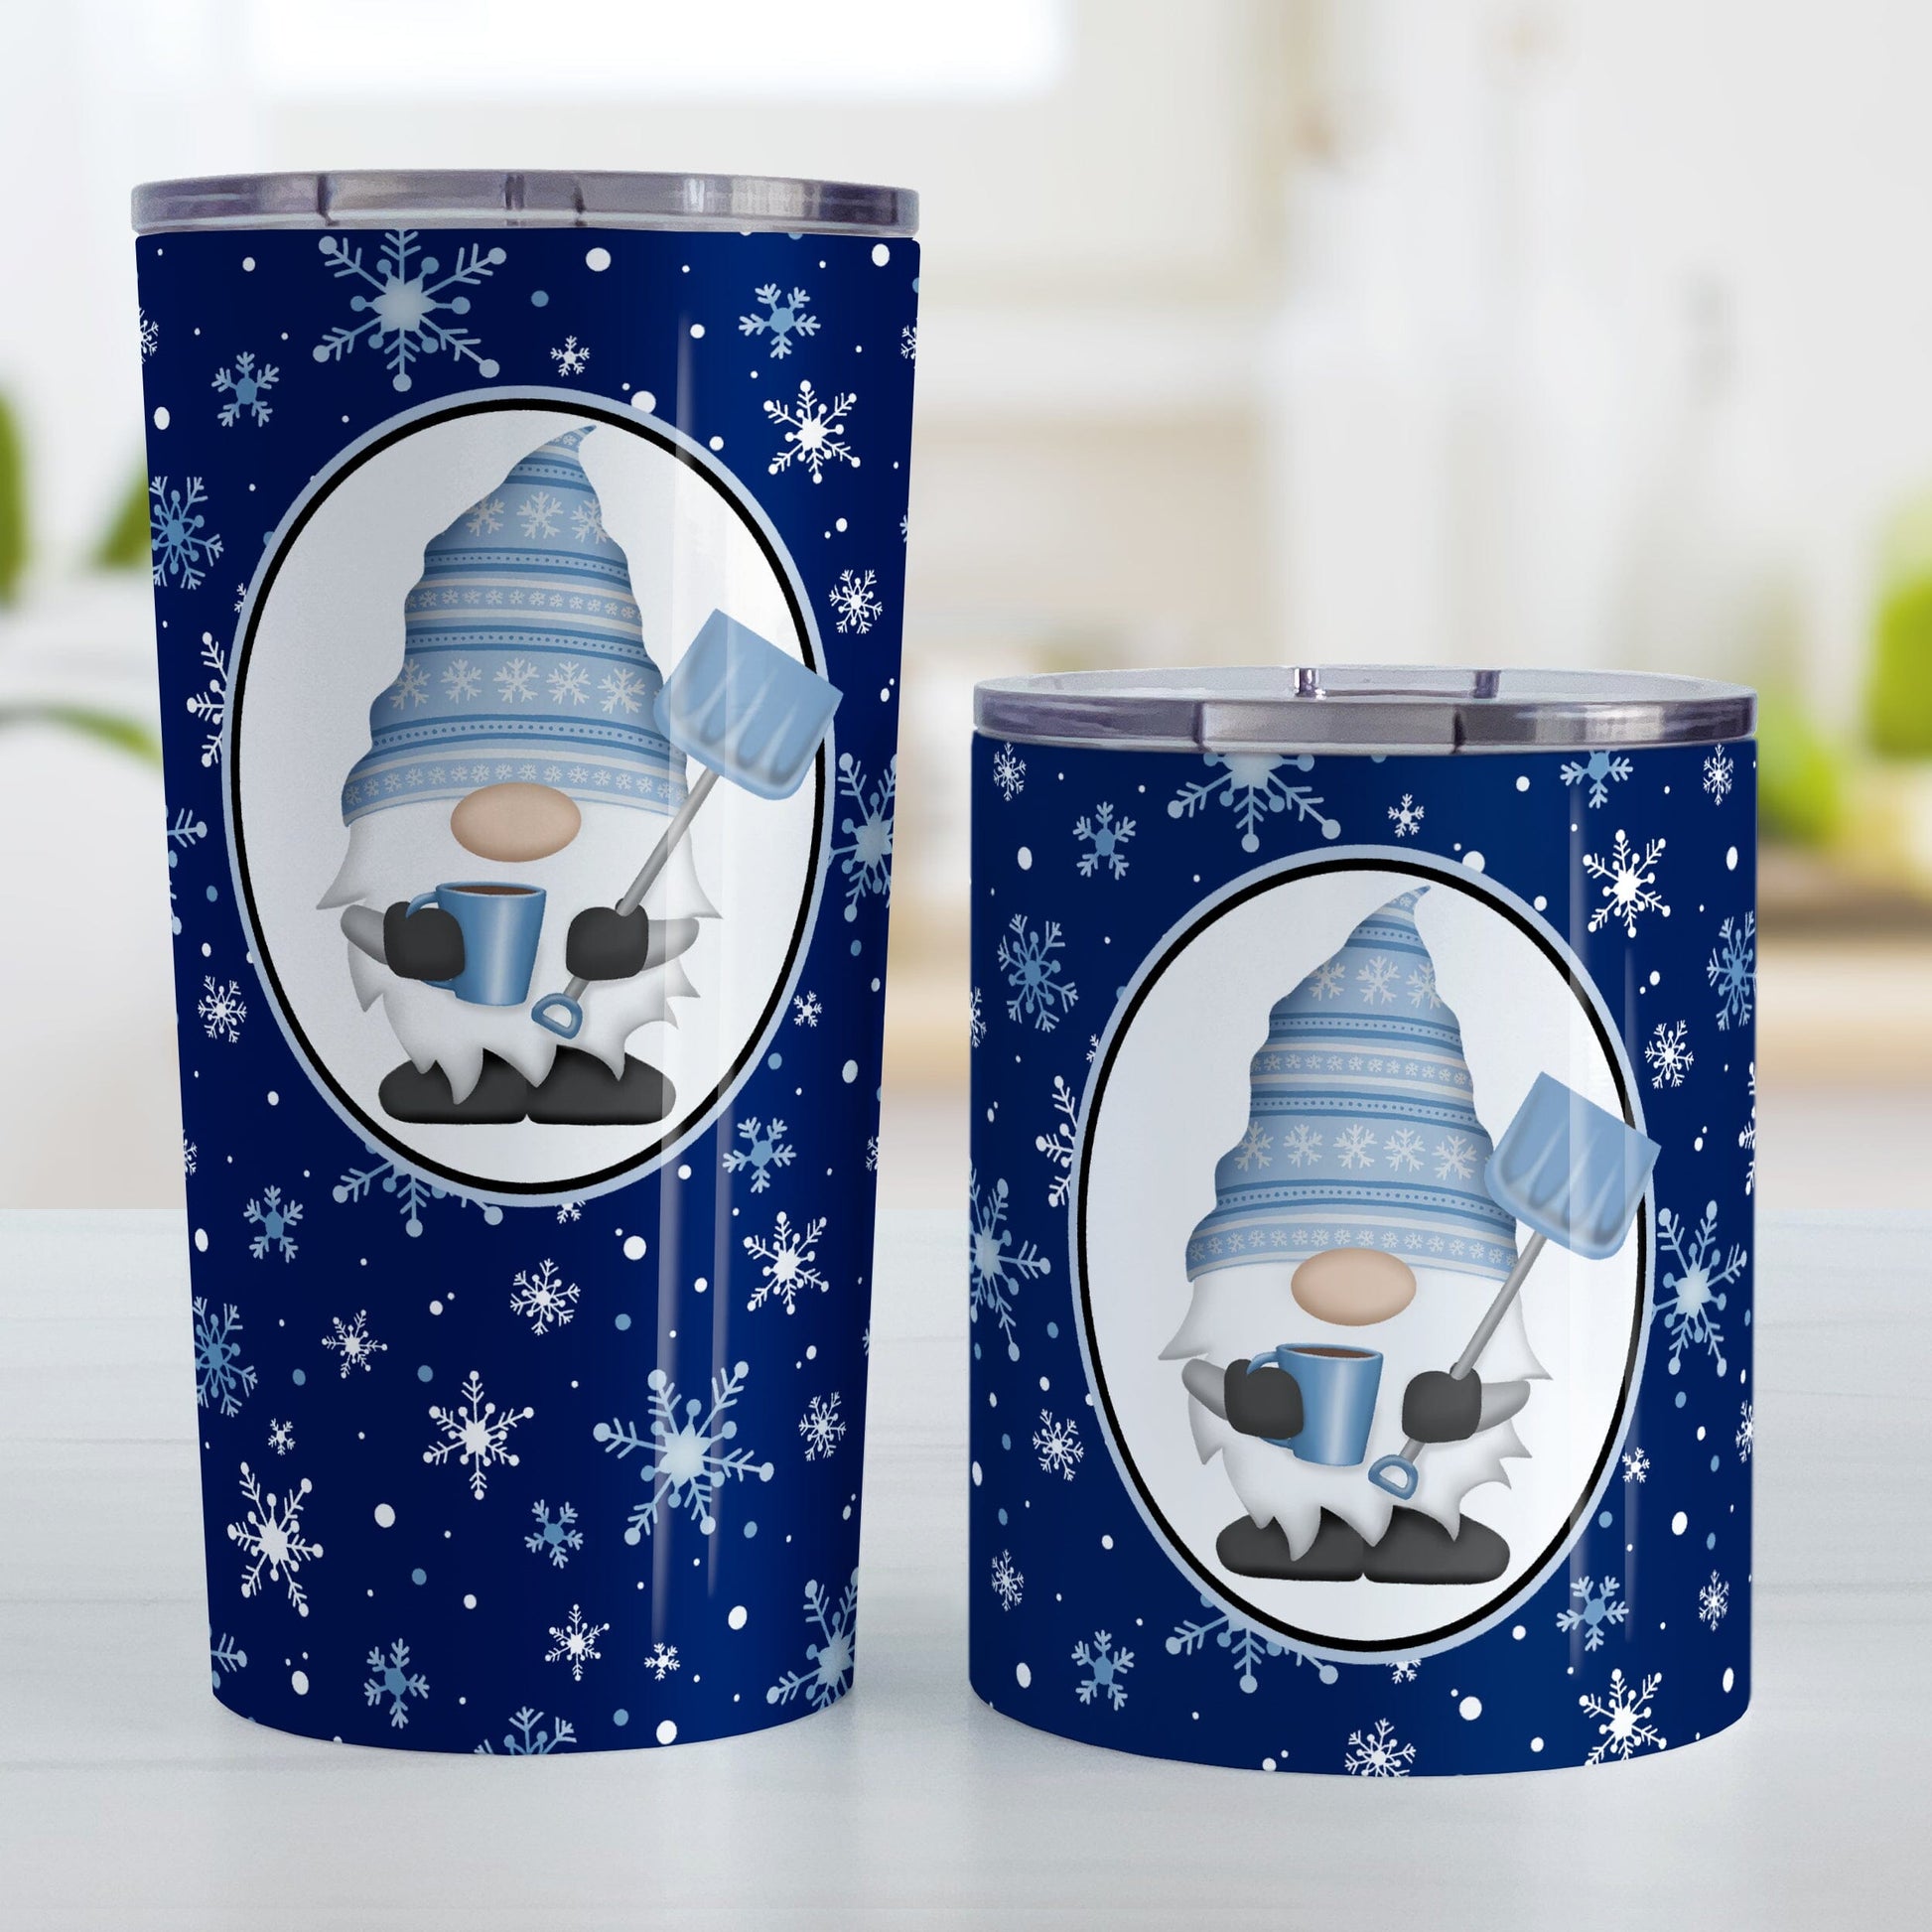 Blue Gnome Snowflakes Tumbler Cup (20oz or 10oz) at Amy's Coffee Mugs. Stainless steel tumbler cups designed with an adorable gnome wearing a festive blue winter hat and holding a hot beverage and a snow shovel in a white oval over a blue night snowflakes background that wraps around the cups. Photo shows both sized cups next to each other on a table.